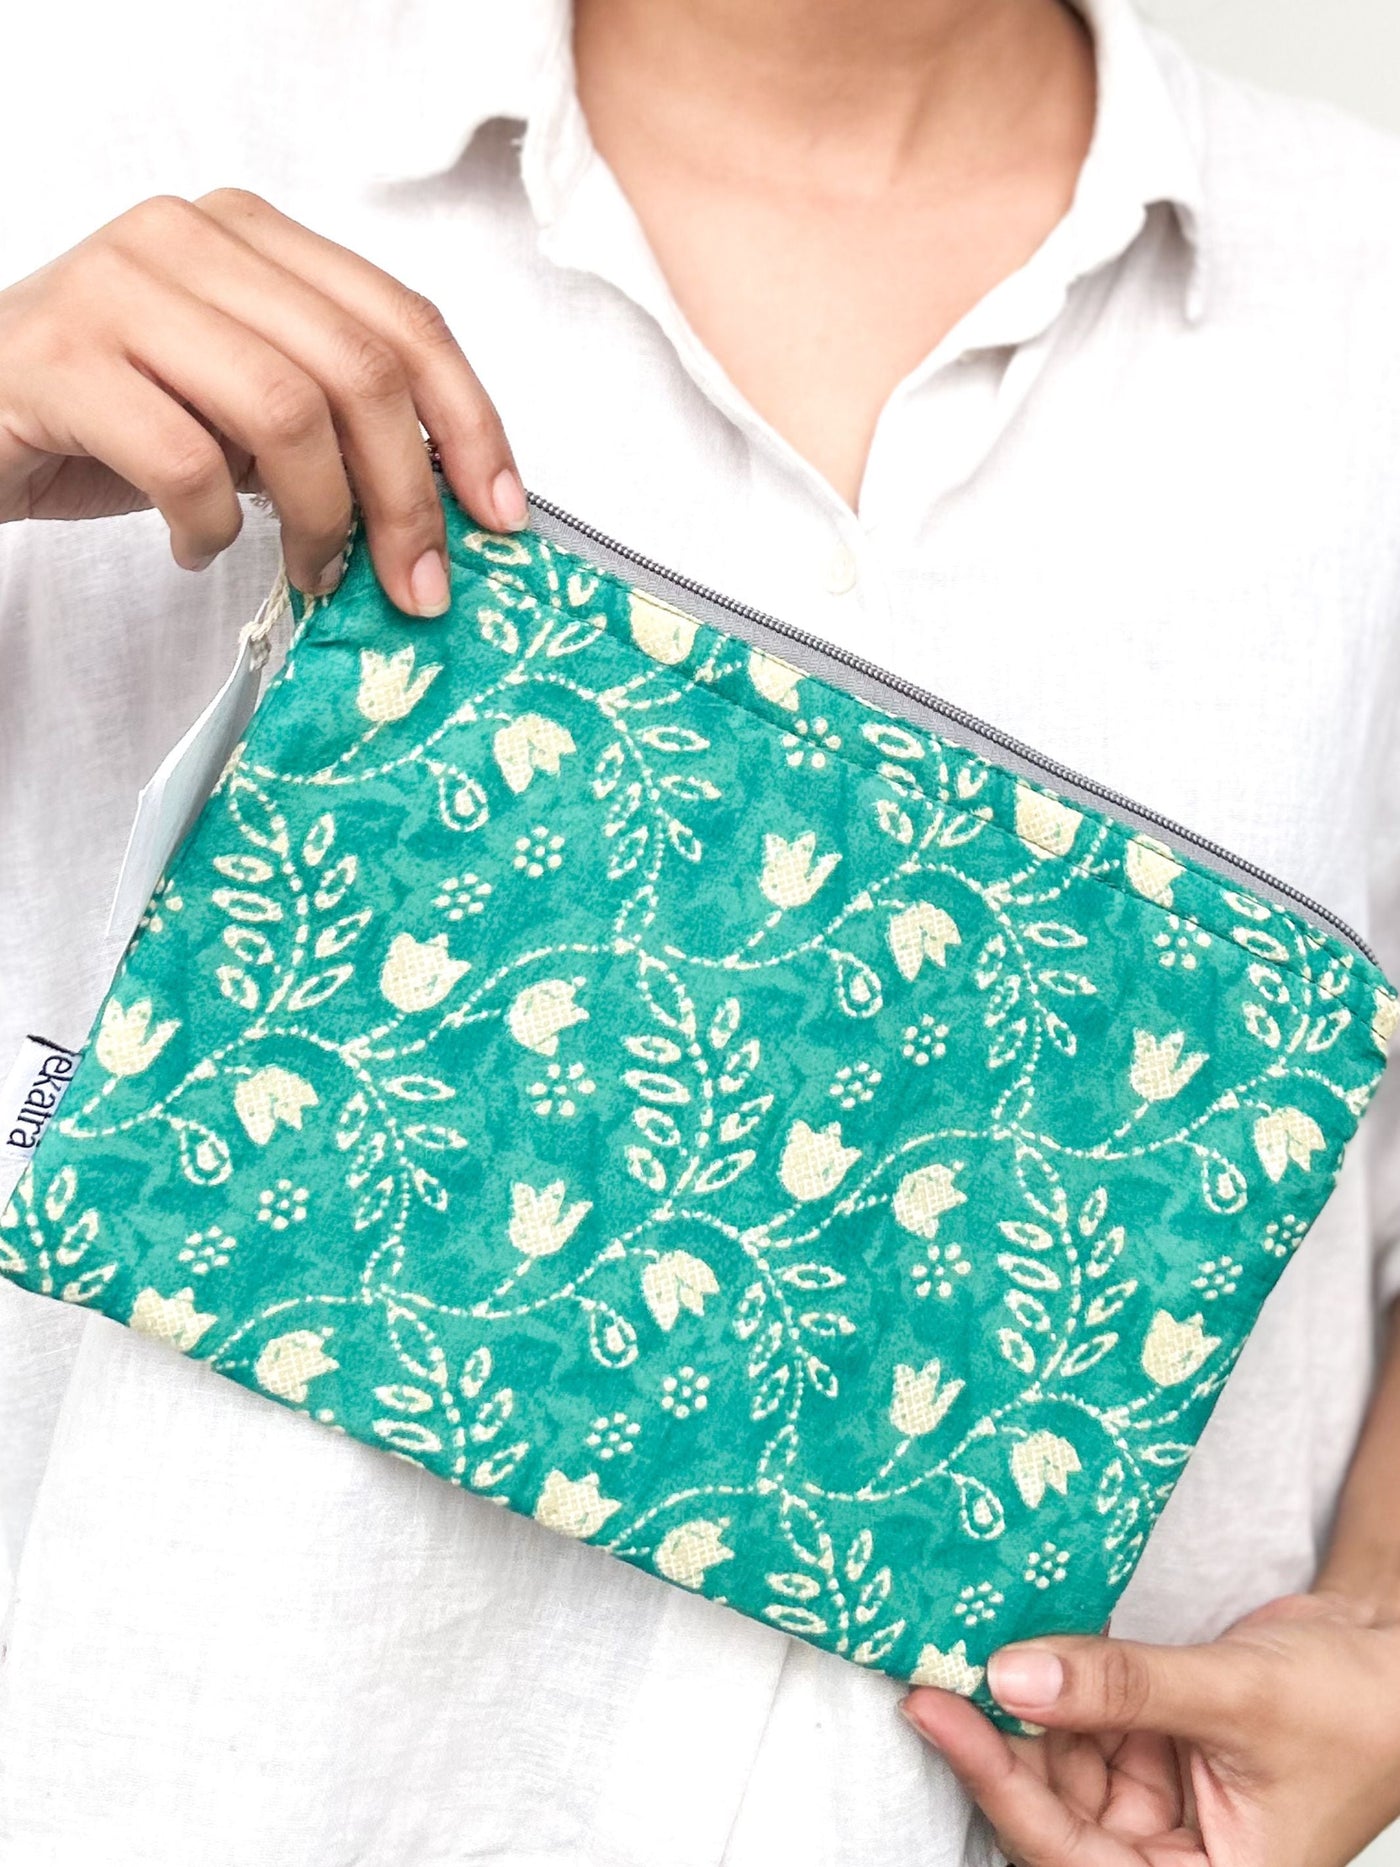 Sustainable Cotton Travel Organizer - Teal Floral